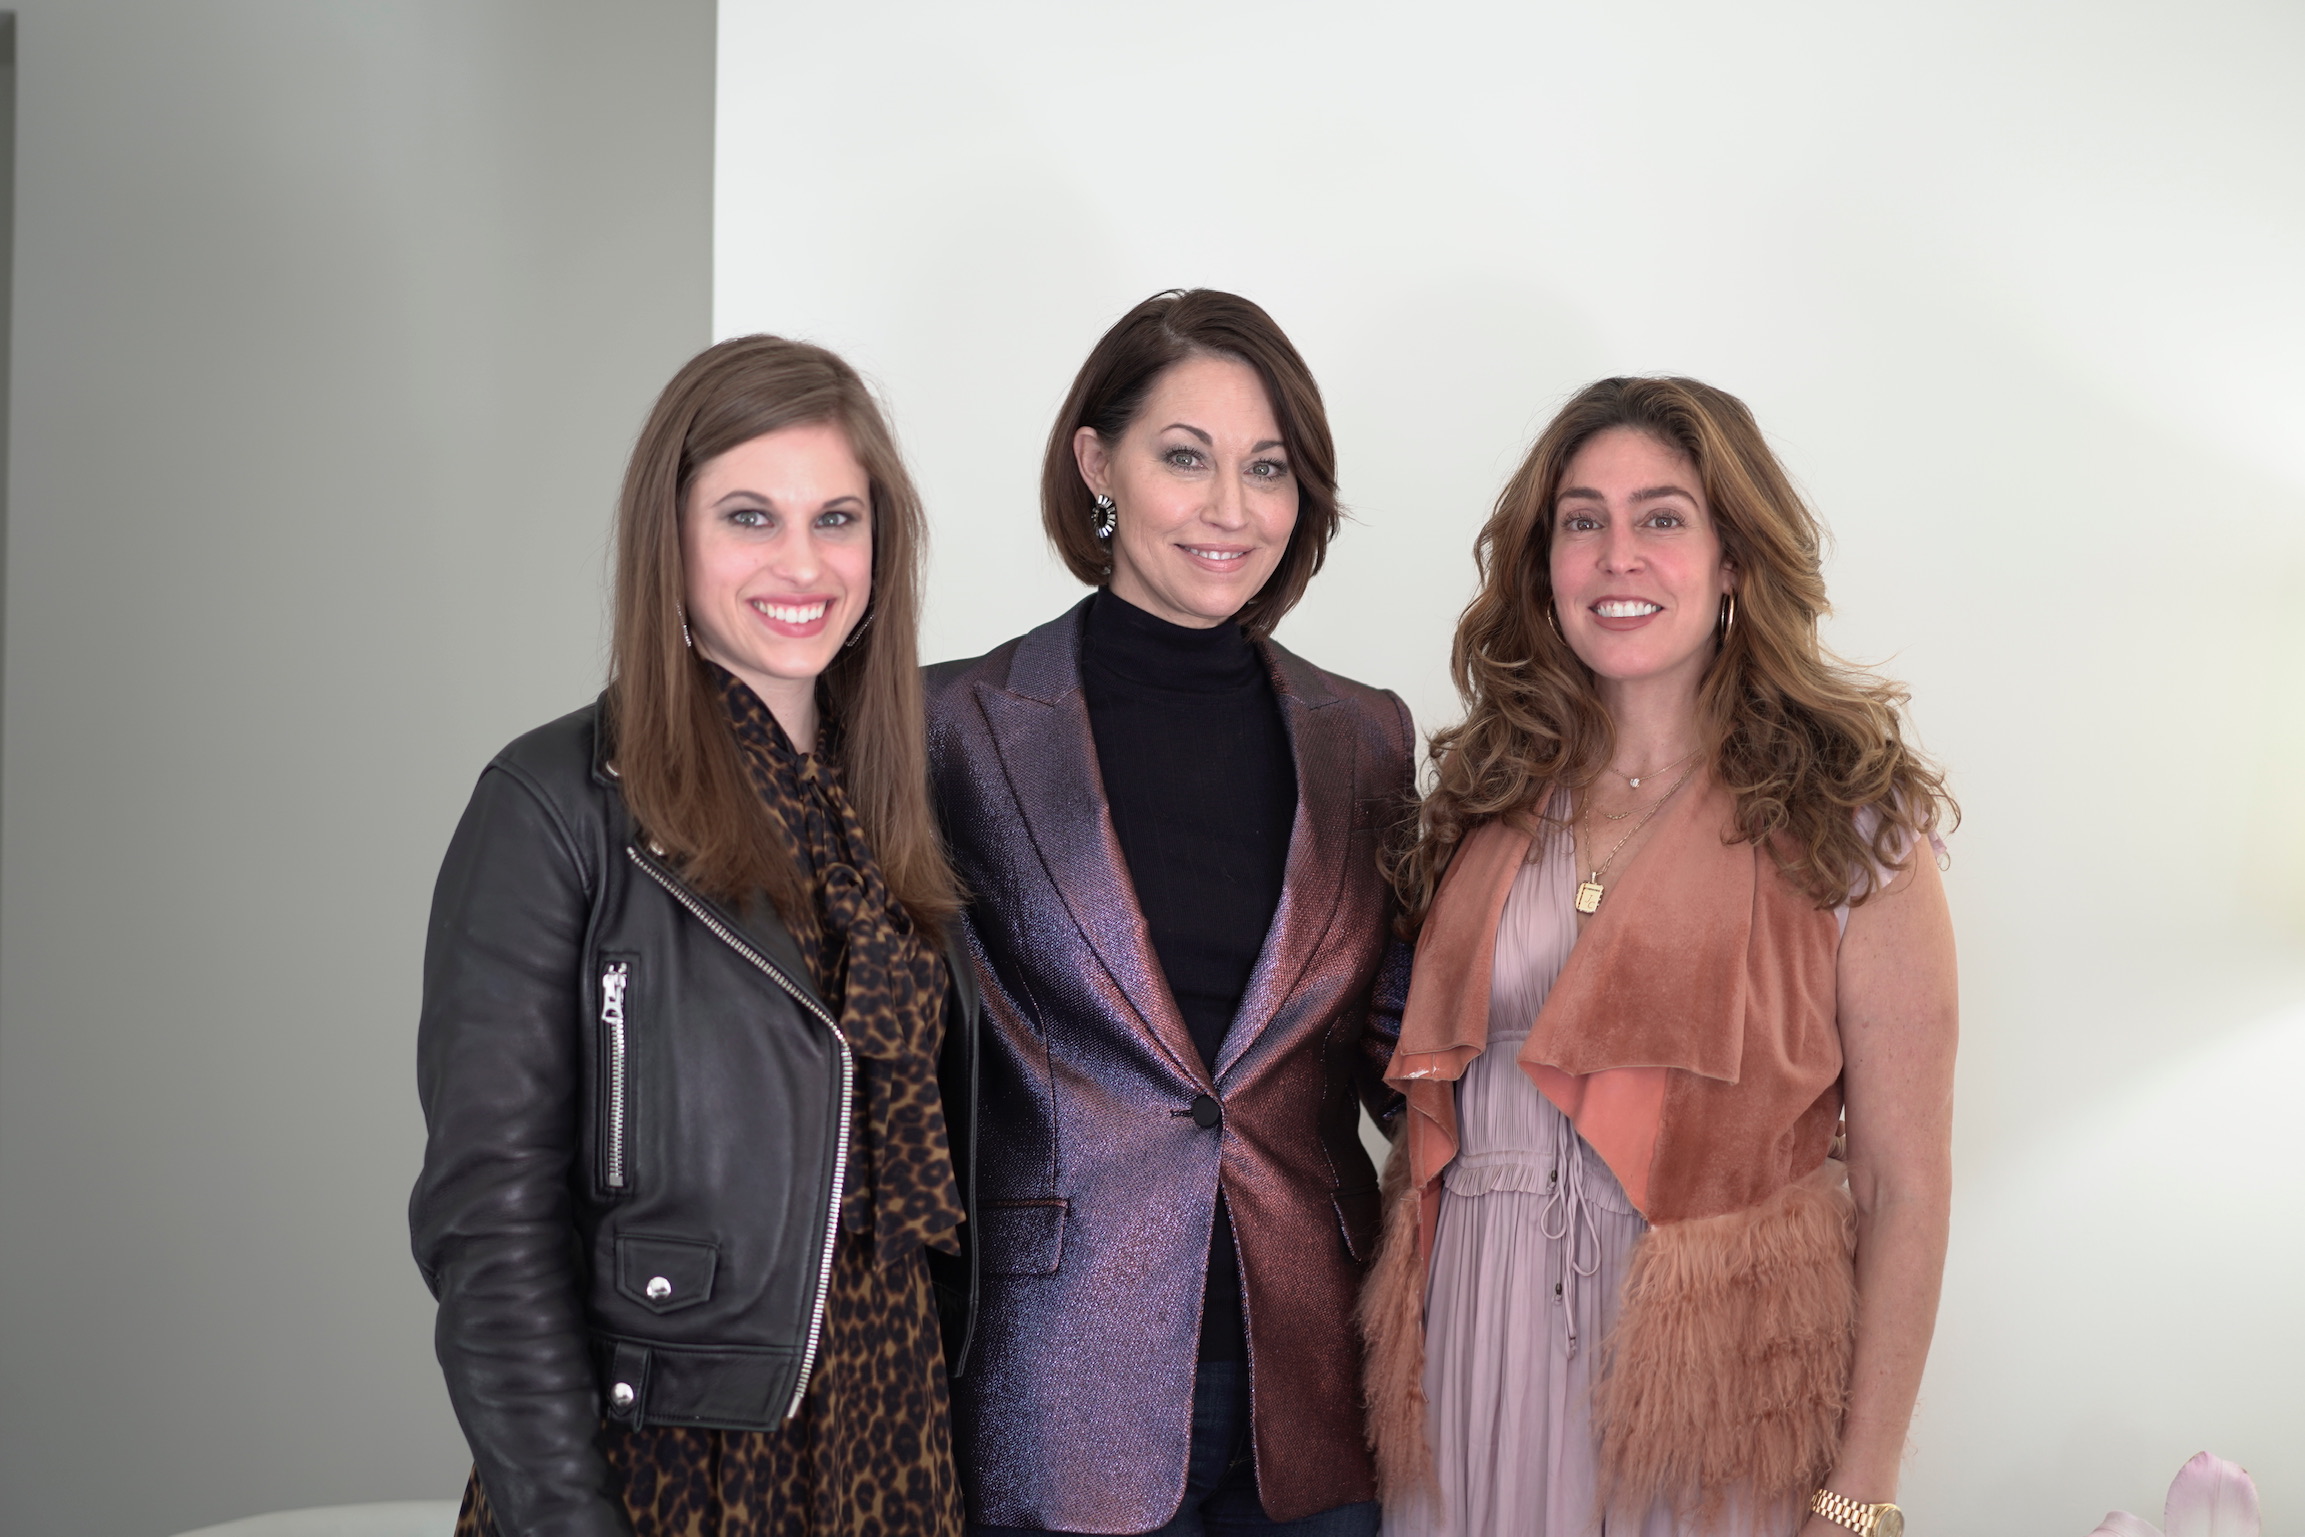 Three women: one wearing a black leather jacket & leopard print dress, one wearing a purple blazer with a black turtleneck and one wearing a pink sleeveless vest over a pink dress. They all have brown hair